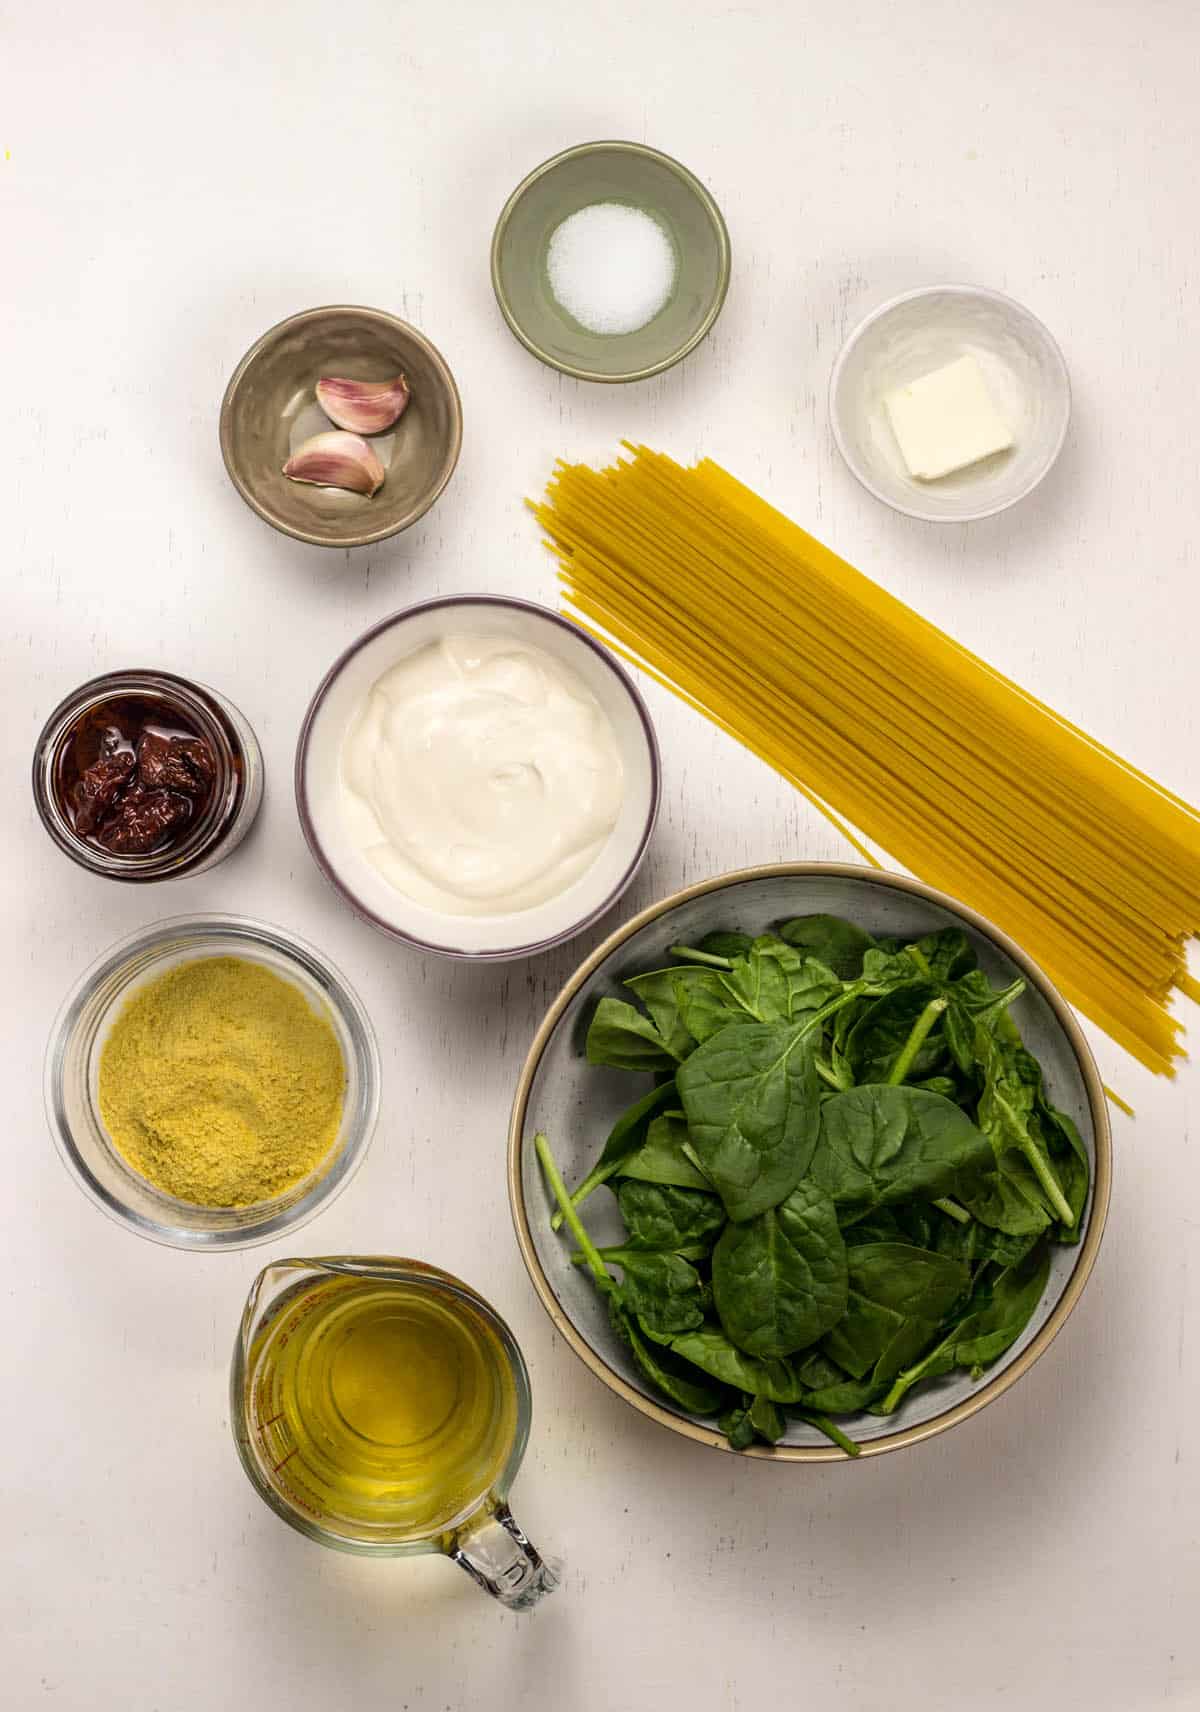 Ingredients for Creamy Spaghetti with Sun-dried Tomatoes